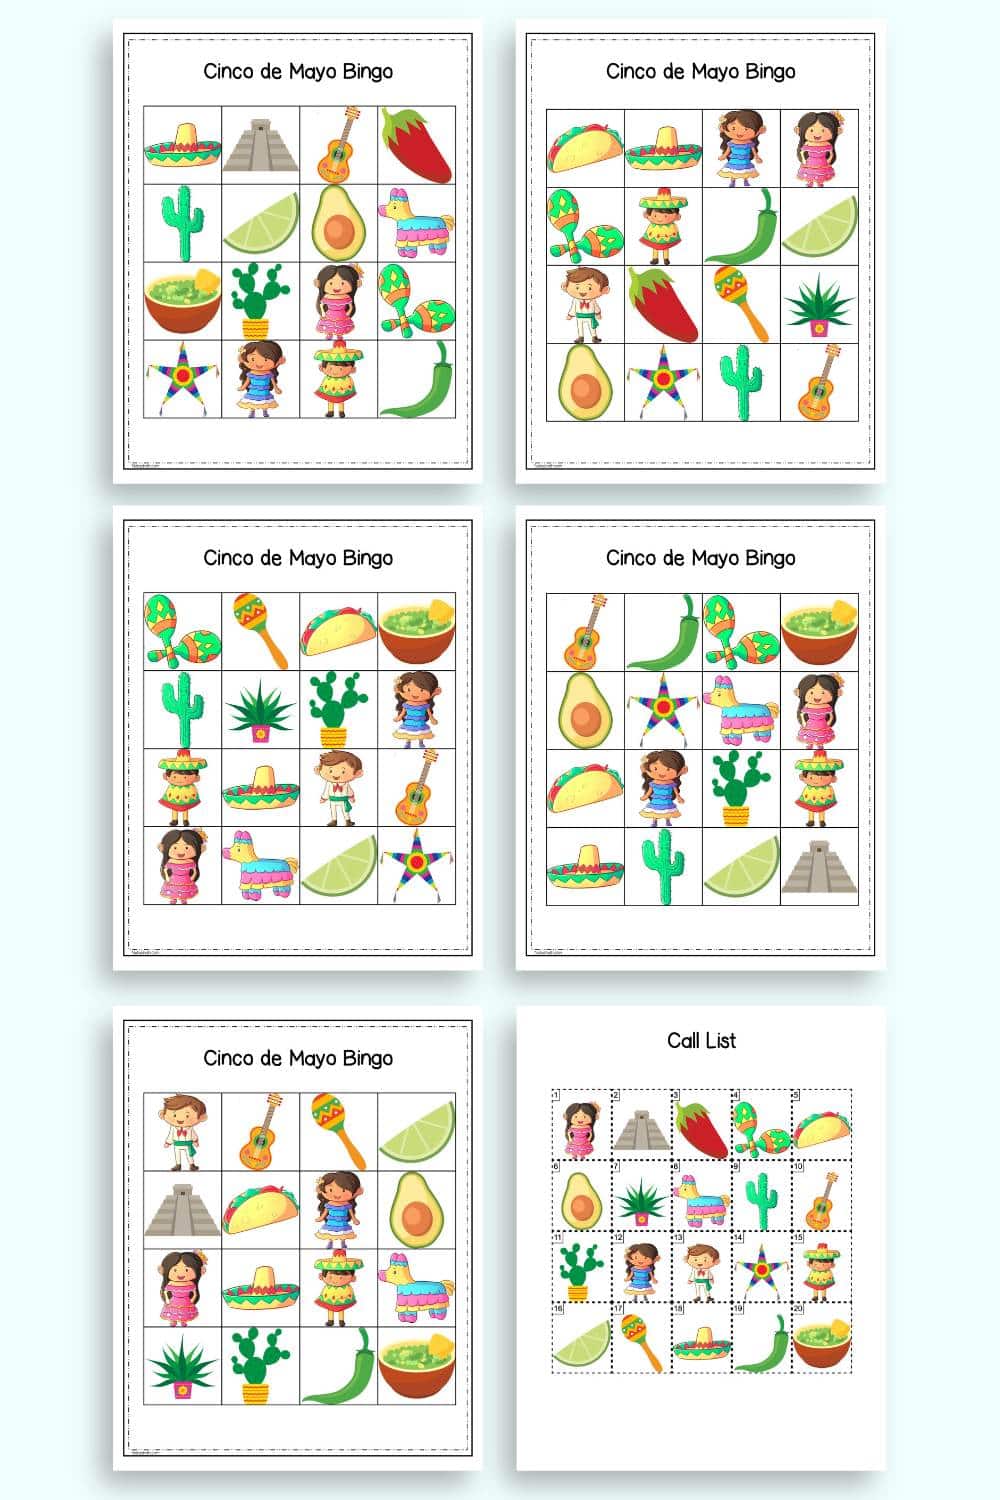 A preview of five 4x4 Cinco de Mayo bingo cards and a page of calling cards